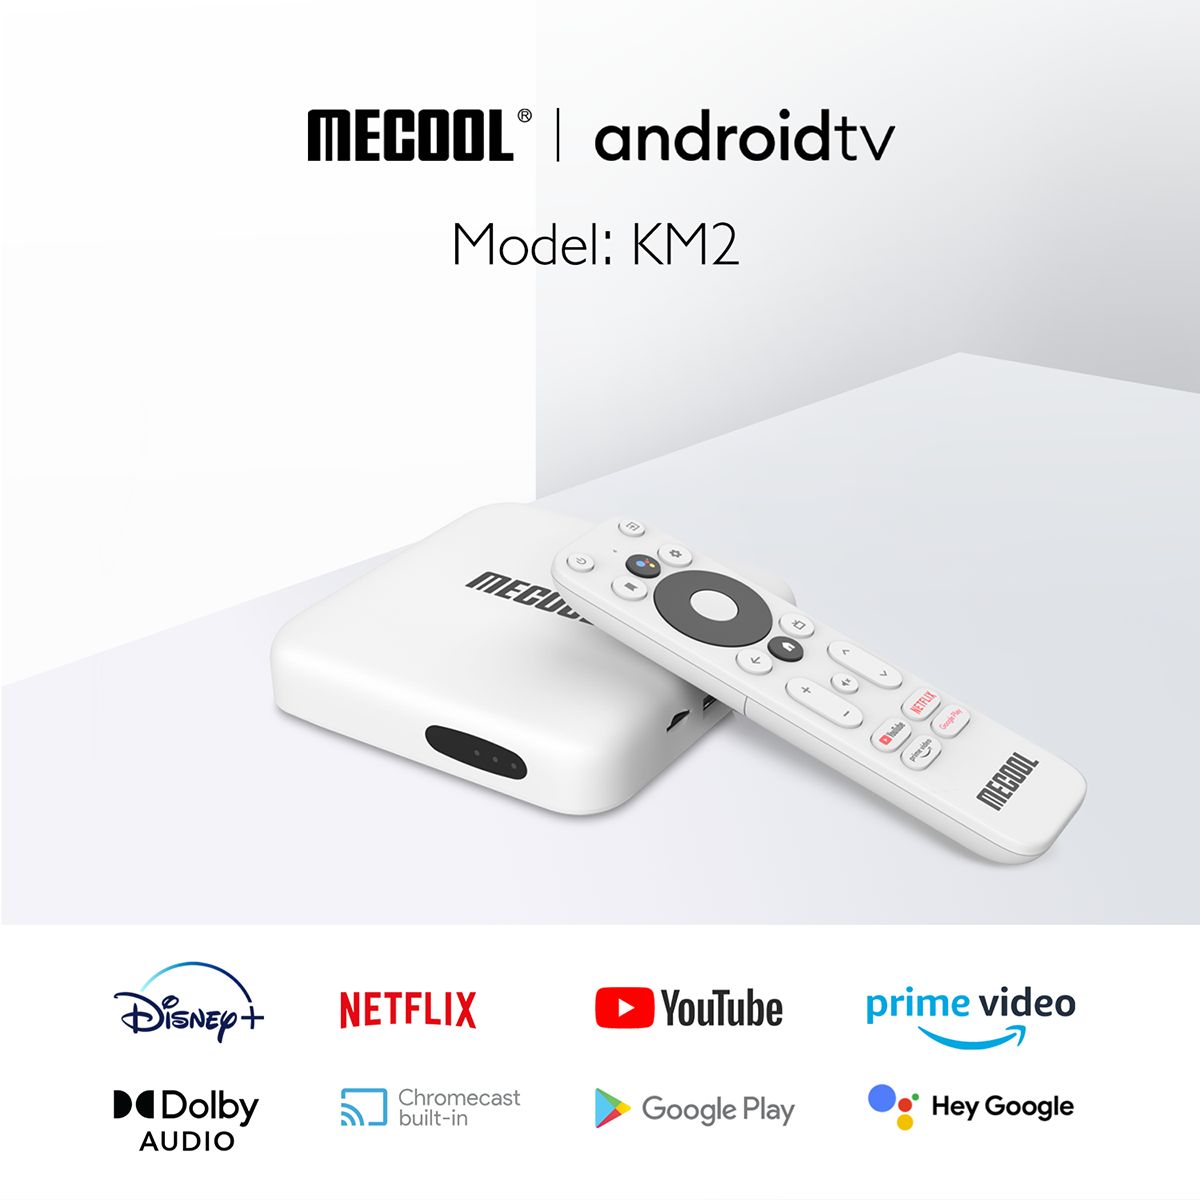 Mecool android tv Model: KM2 Disnay+ NETFLIX	YouTube	prime video Dolby AUDIO  Chrome Cast  Google Play	Hey Google